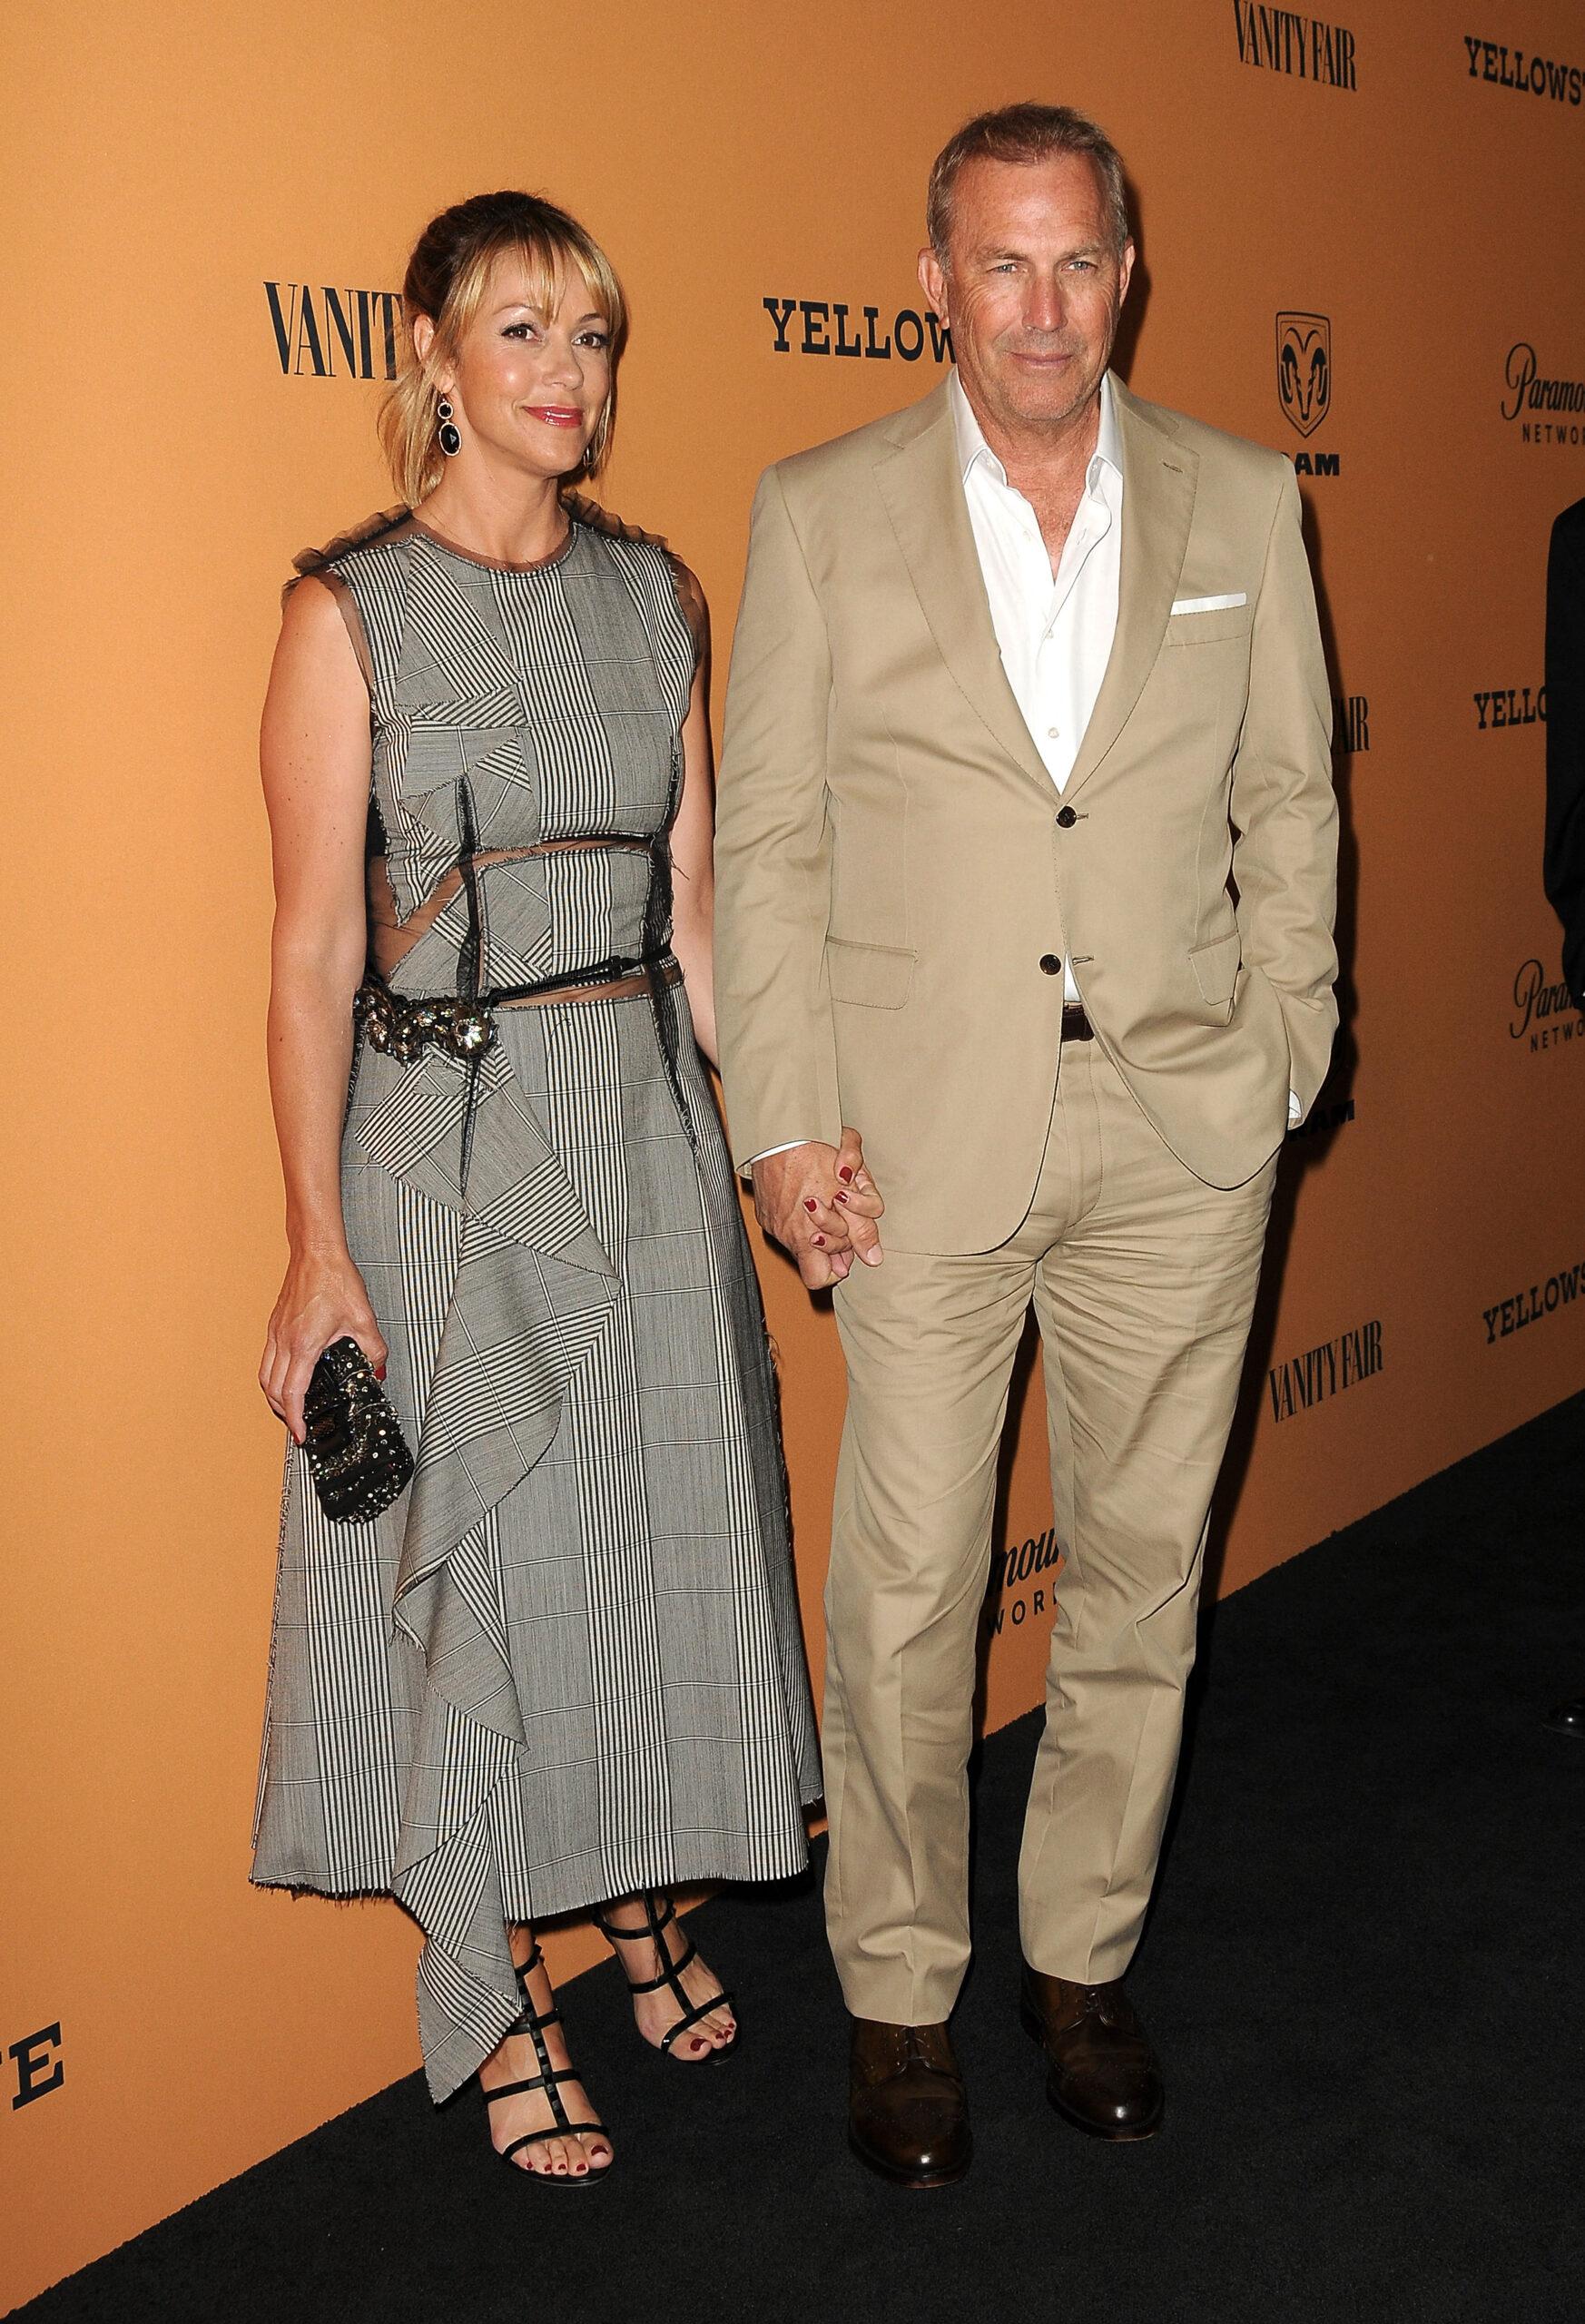 Christine Baumgartner and Kevin Costner at the world premiere of "Yellowstone"